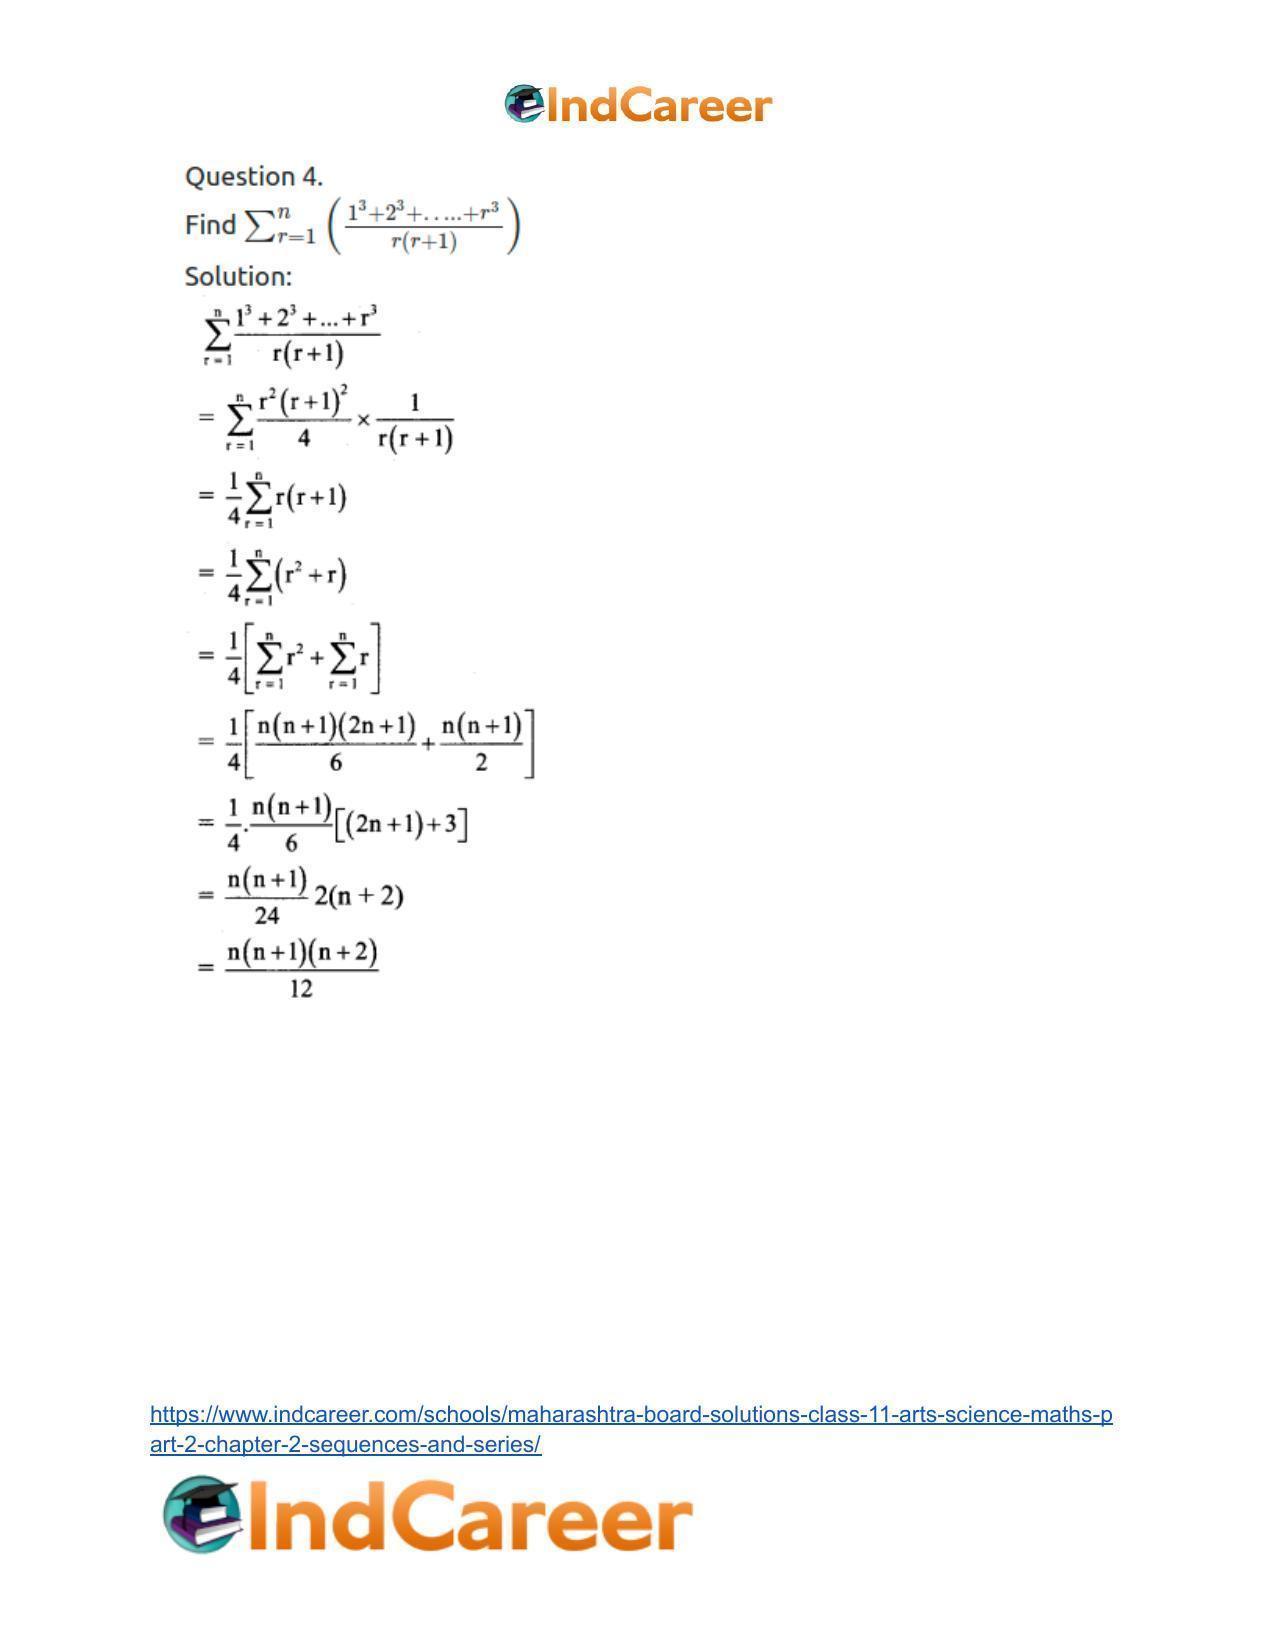 Maharashtra Board Solutions Class 11-Arts & Science Maths (Part 2): Chapter 2- Sequences and Series - Page 70